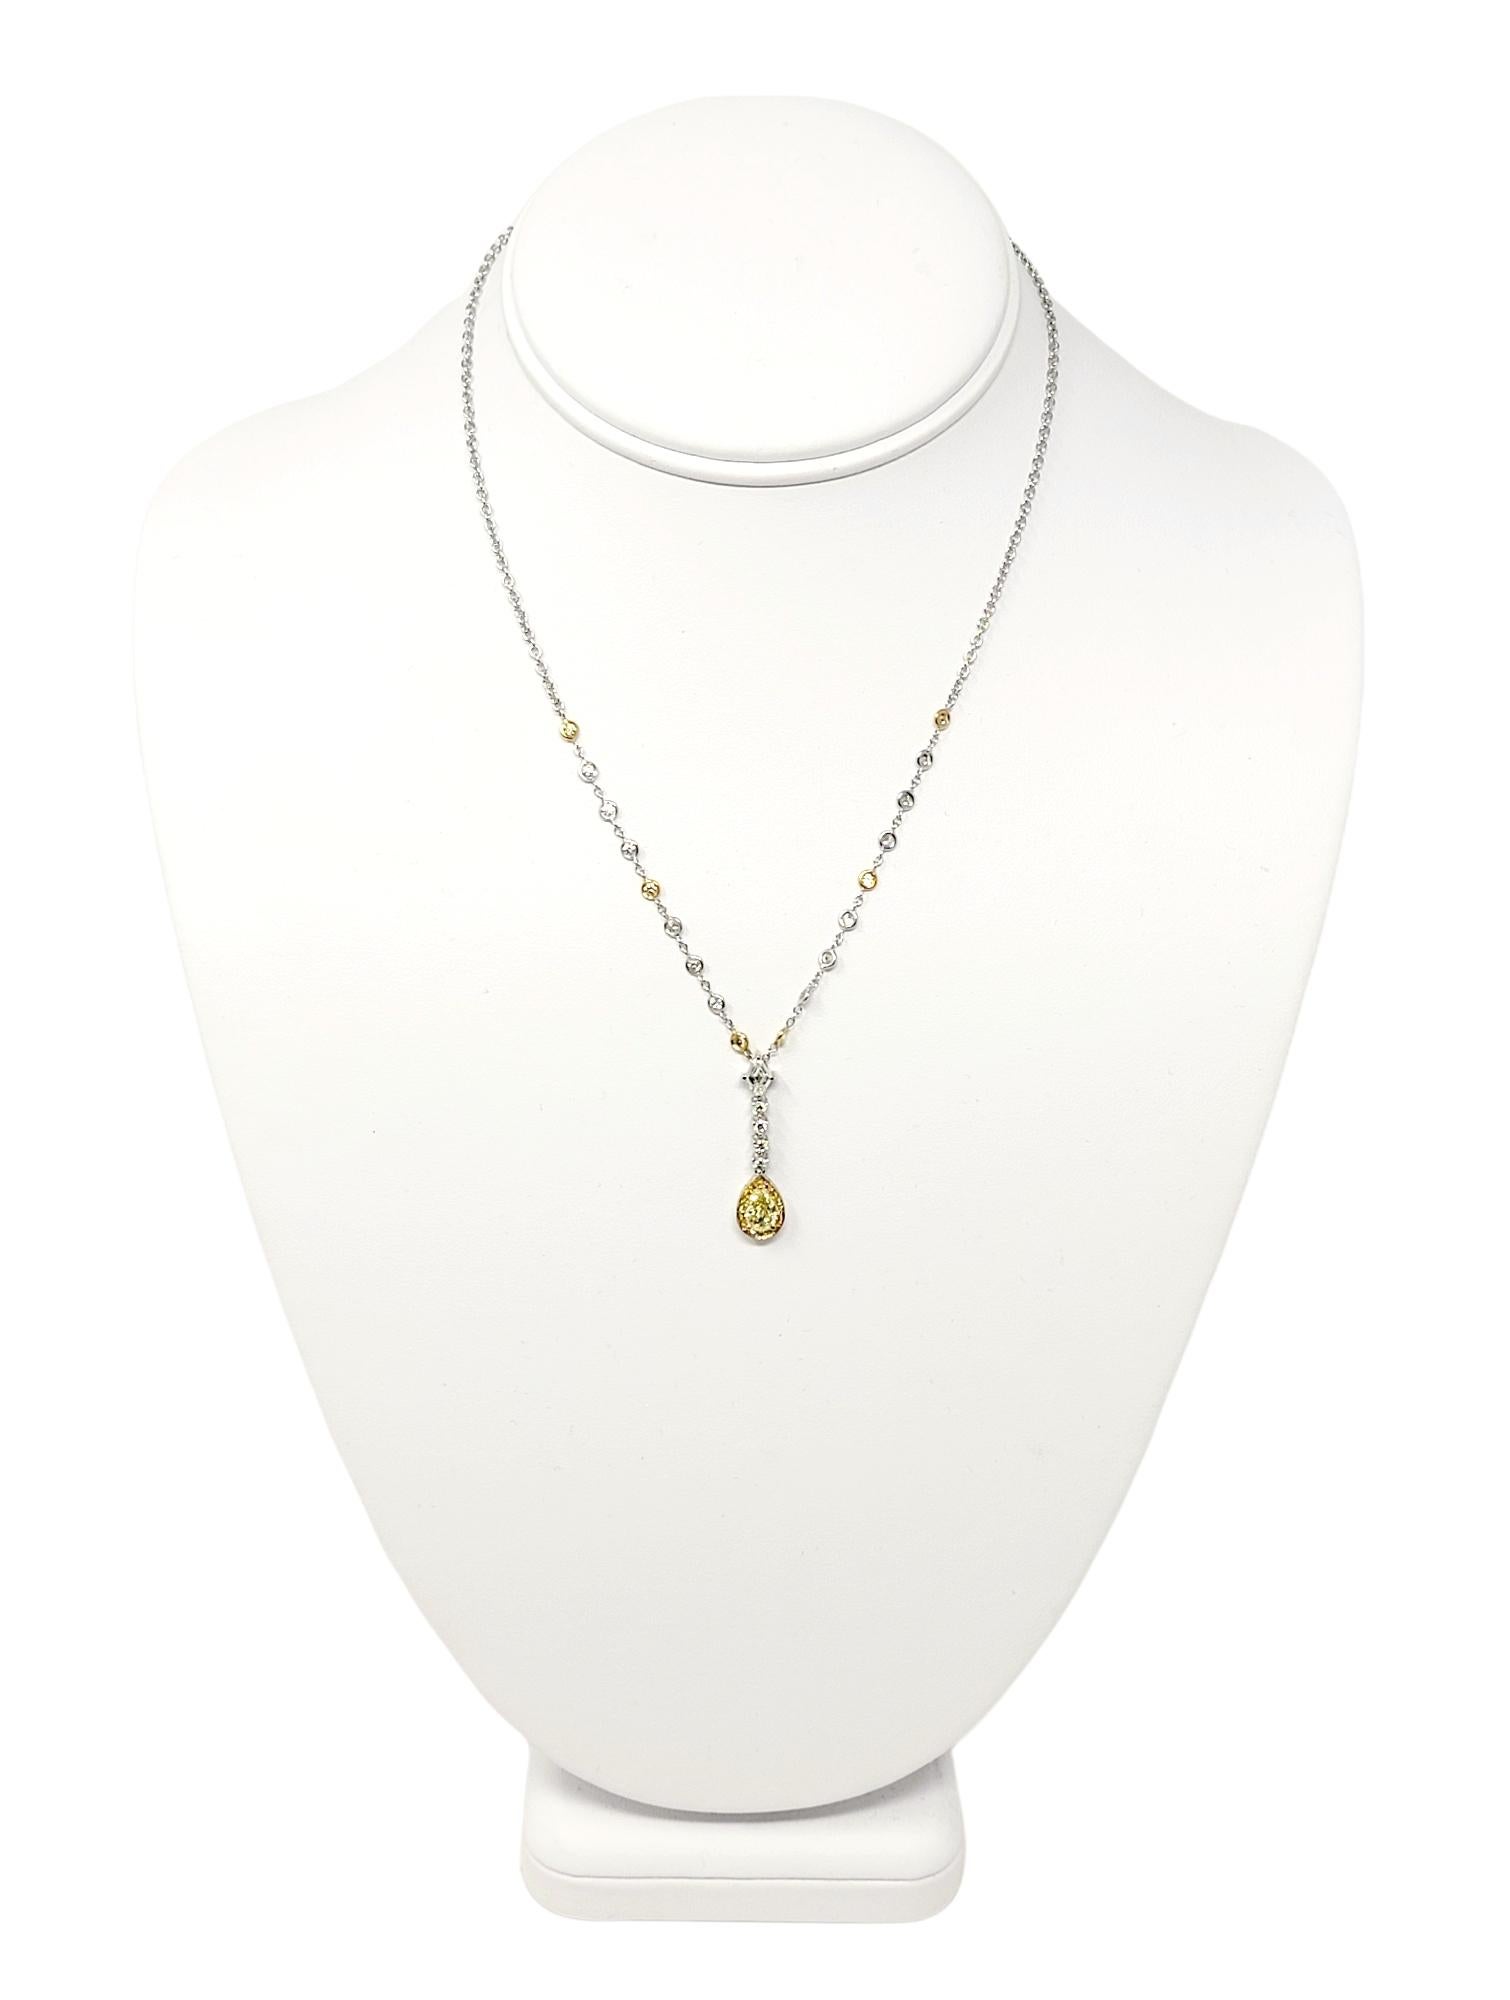 Gregg Ruth Yellow and White Diamond Station Drop Necklace Two-Tone 18 Karat Gold For Sale 6